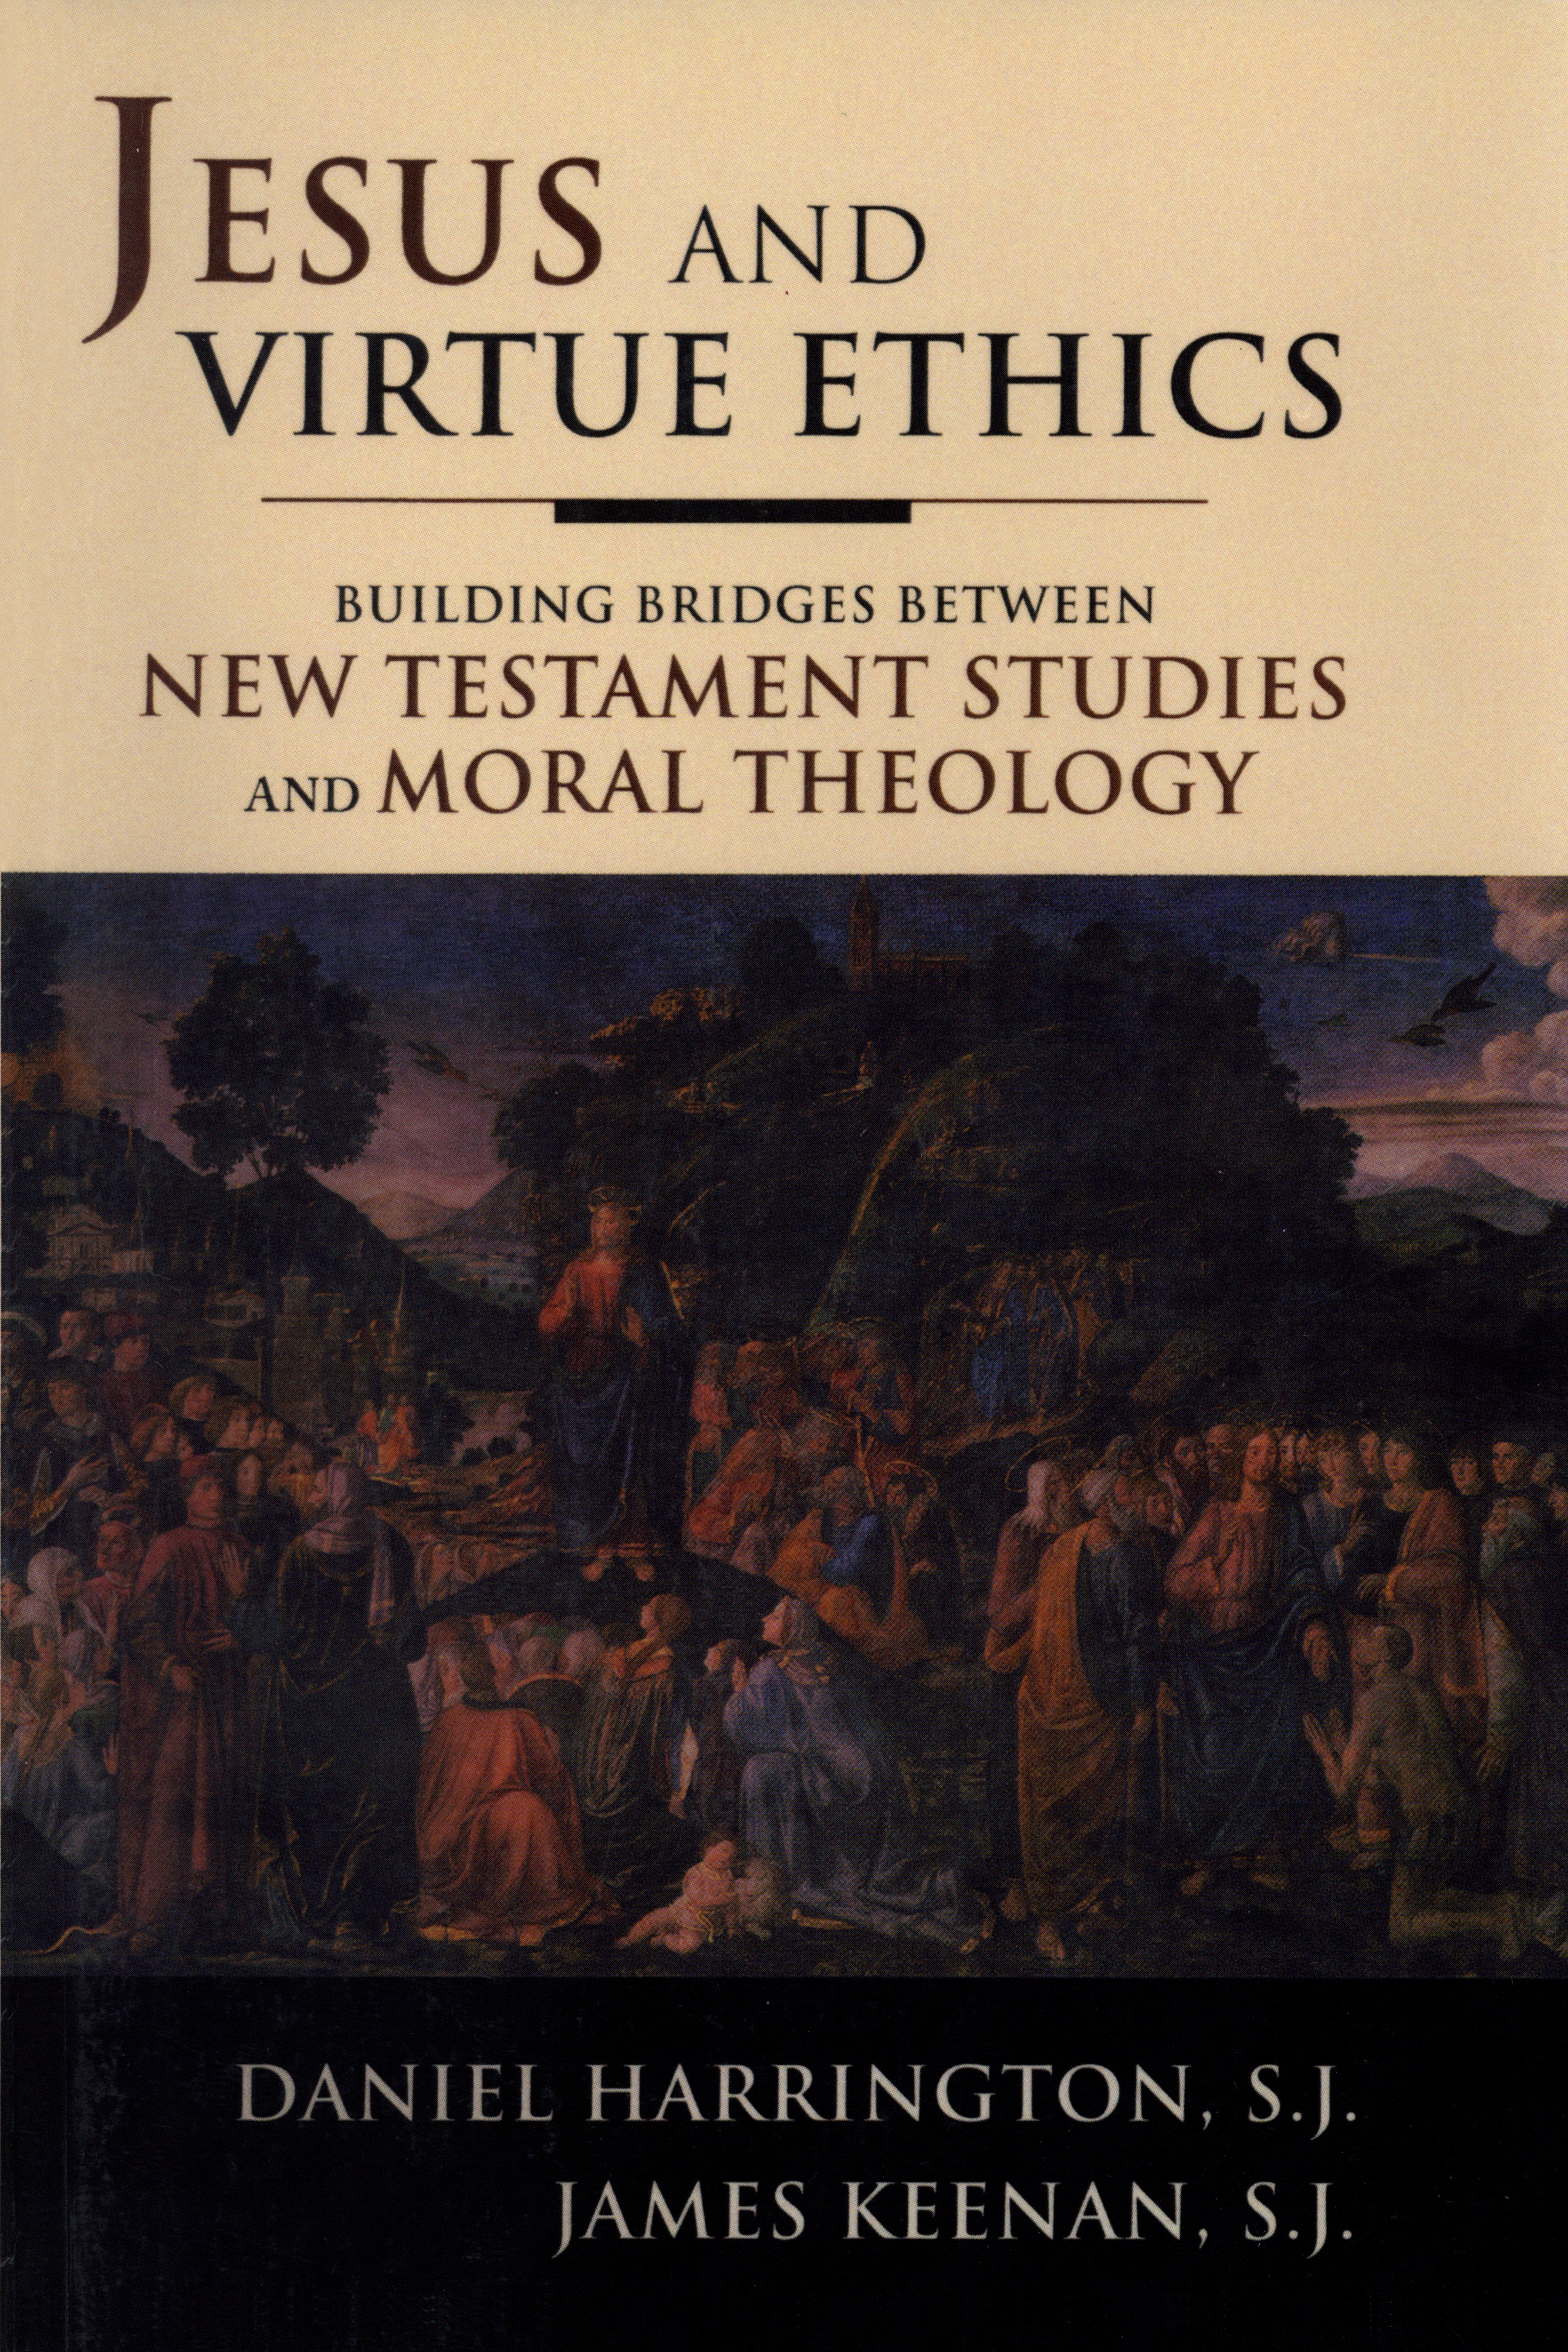 Jesus and Virtue Ethics: Building Bridges between New Testament Studies and Moral Theology